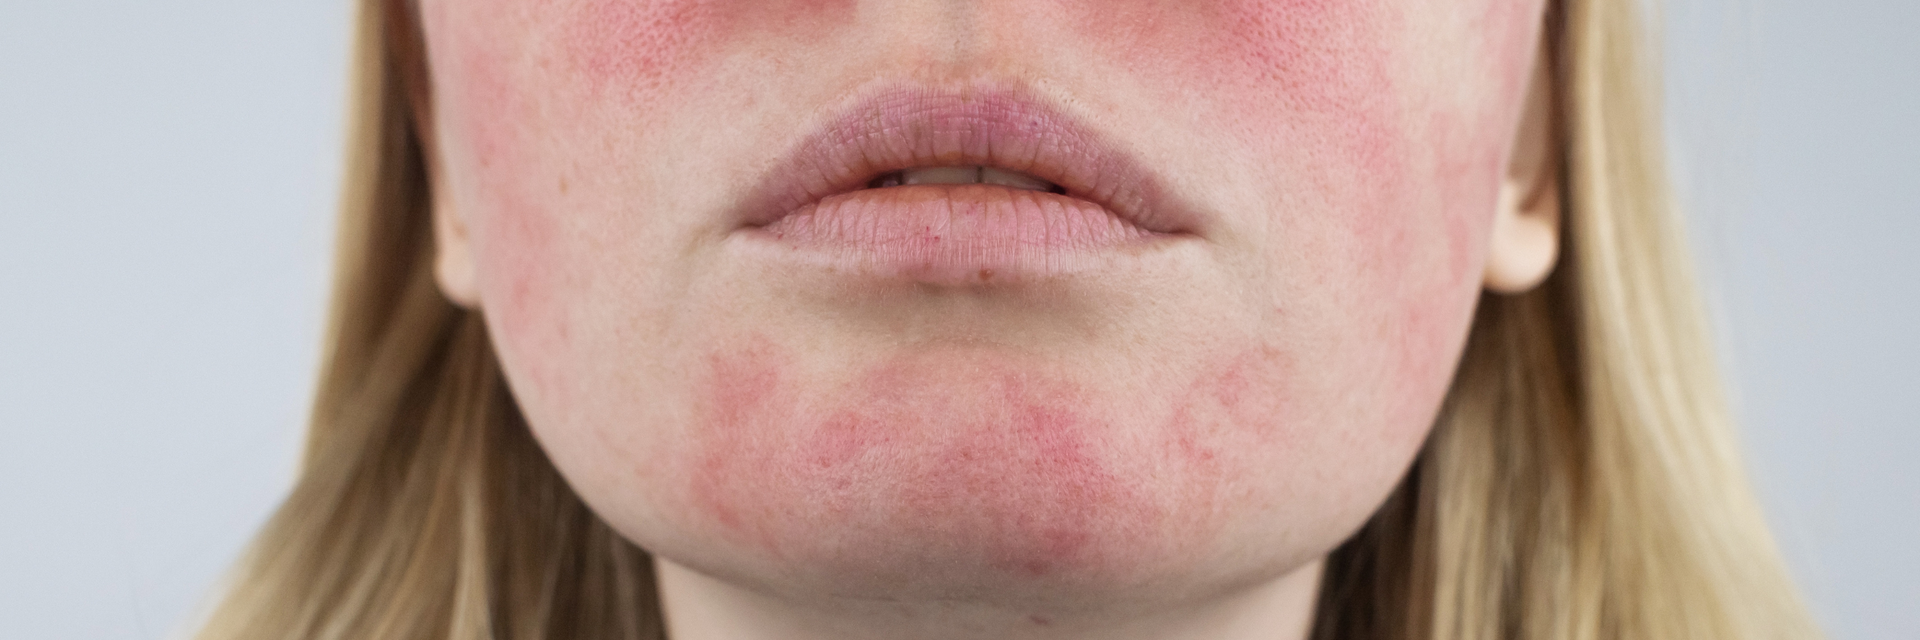 Face with rosacea